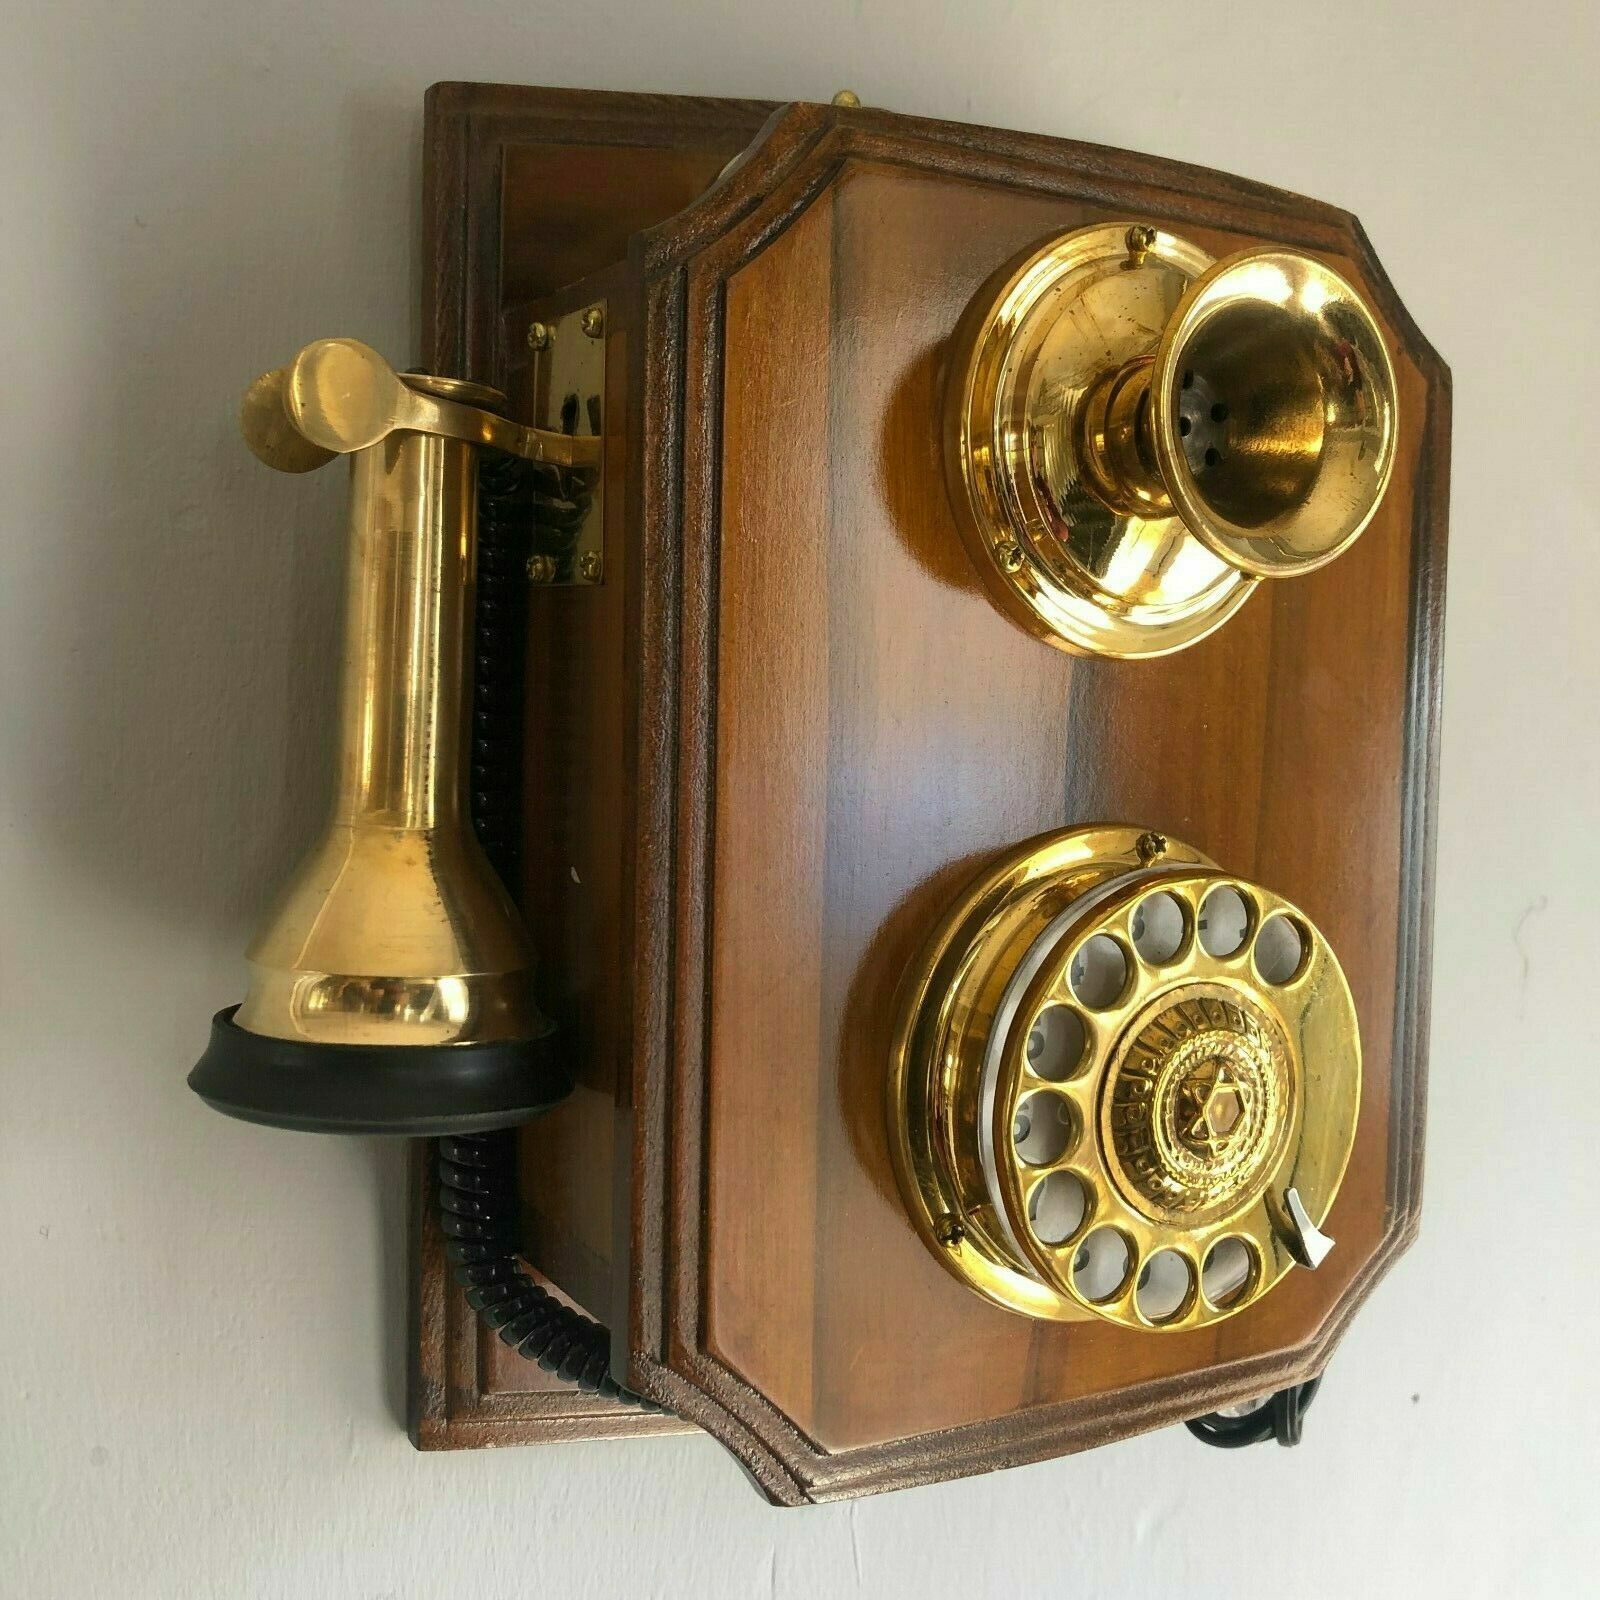 Reproduction Wooden Retro Telephone Rotary Dial Mechanical Bell Wall Mount